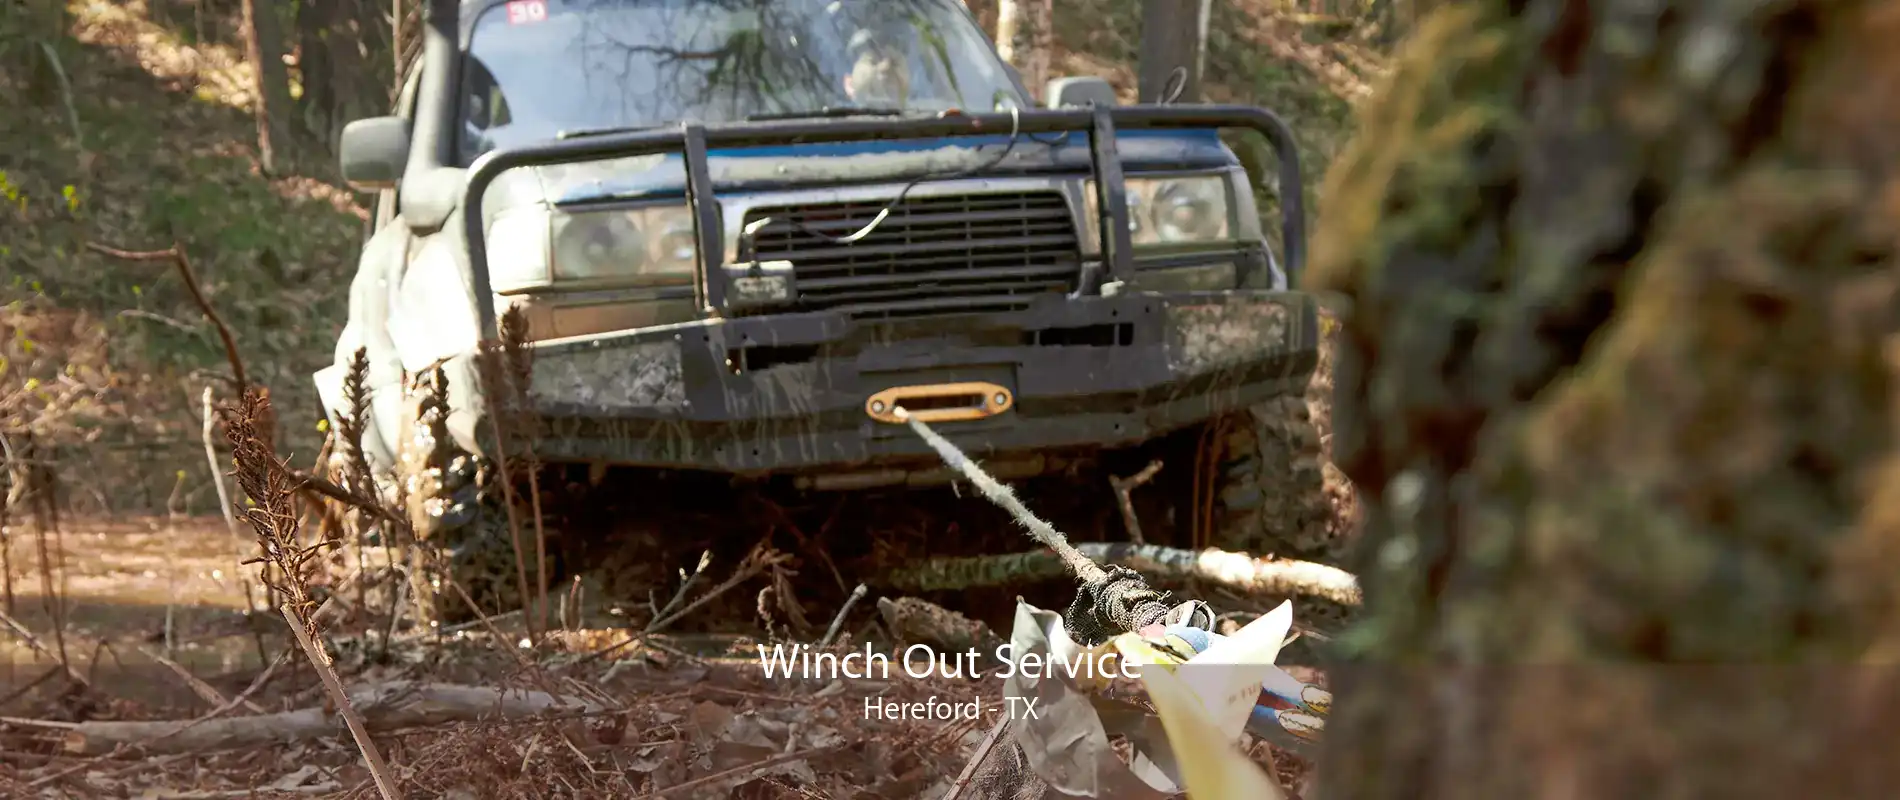 Winch Out Service Hereford - TX